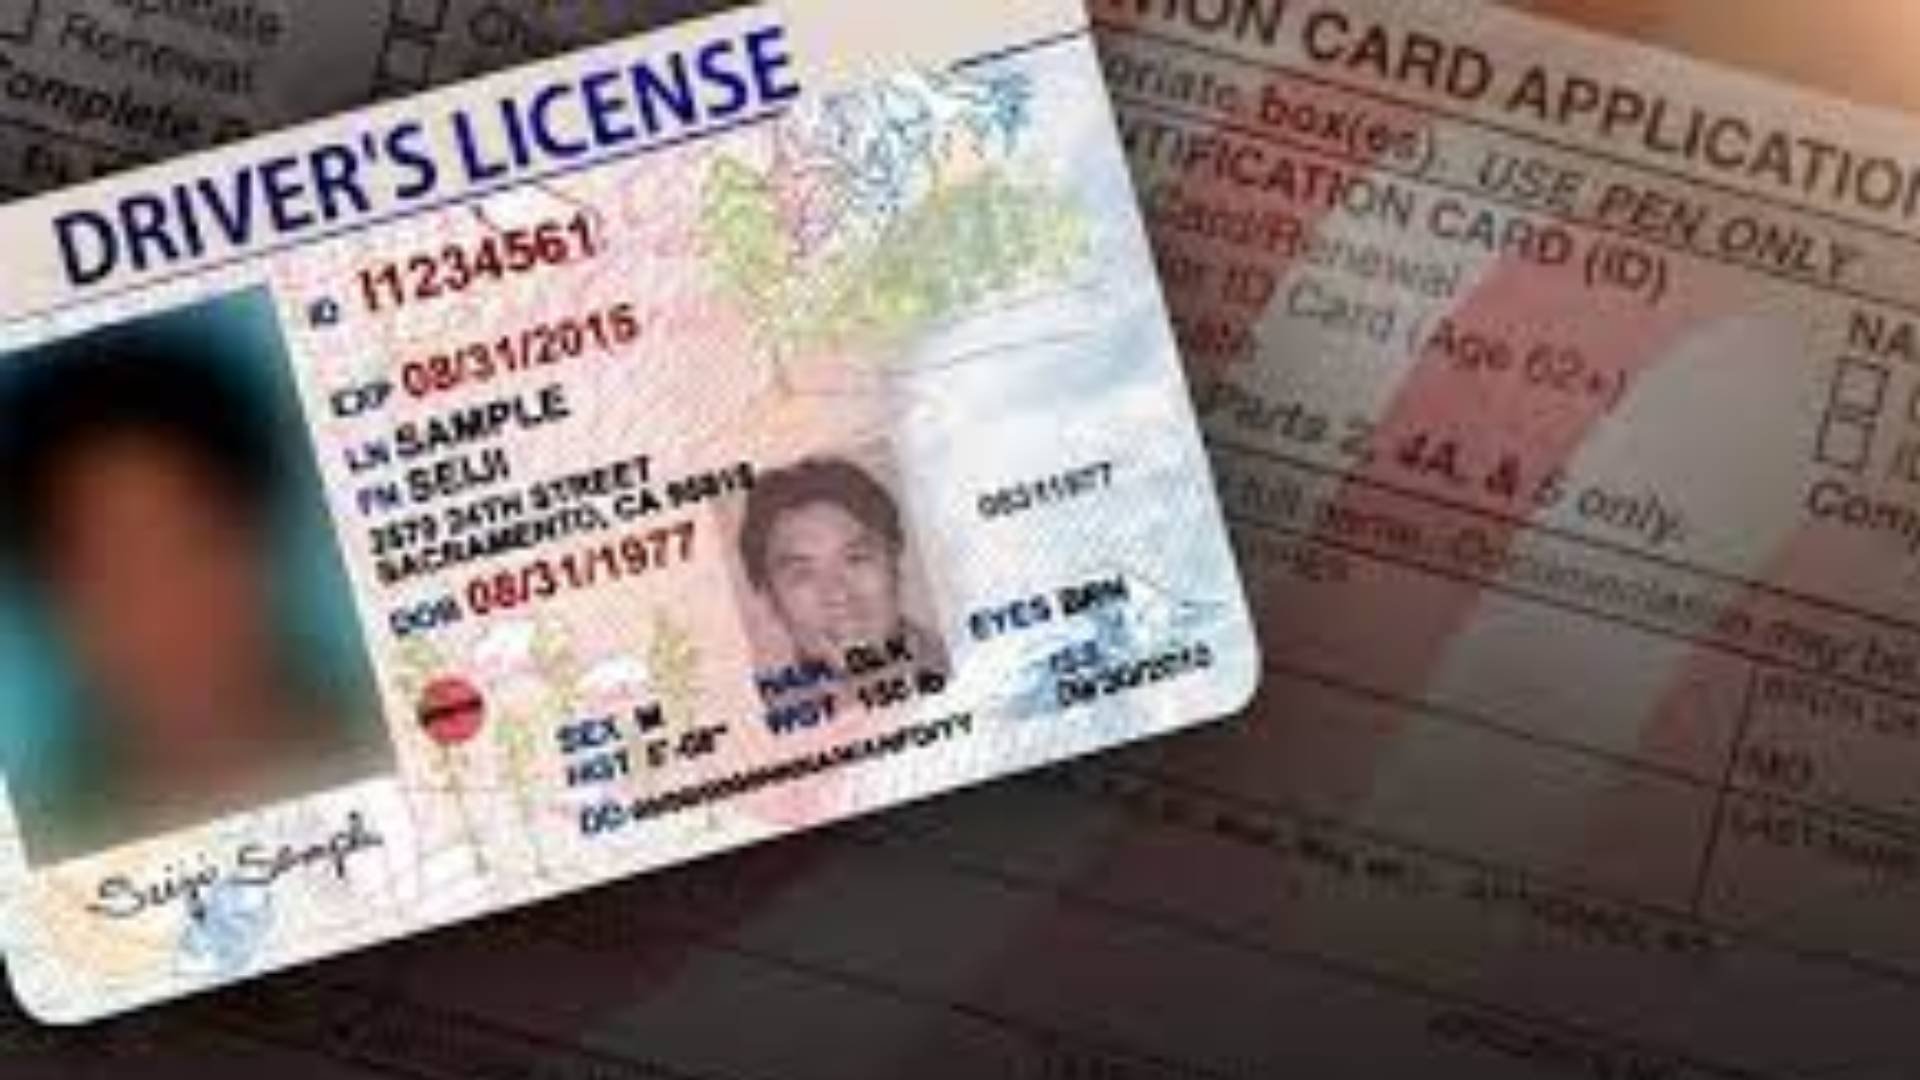 Martin Pringle Attorneys Partner with Kansas Legal Services on Driver’s License Clinic